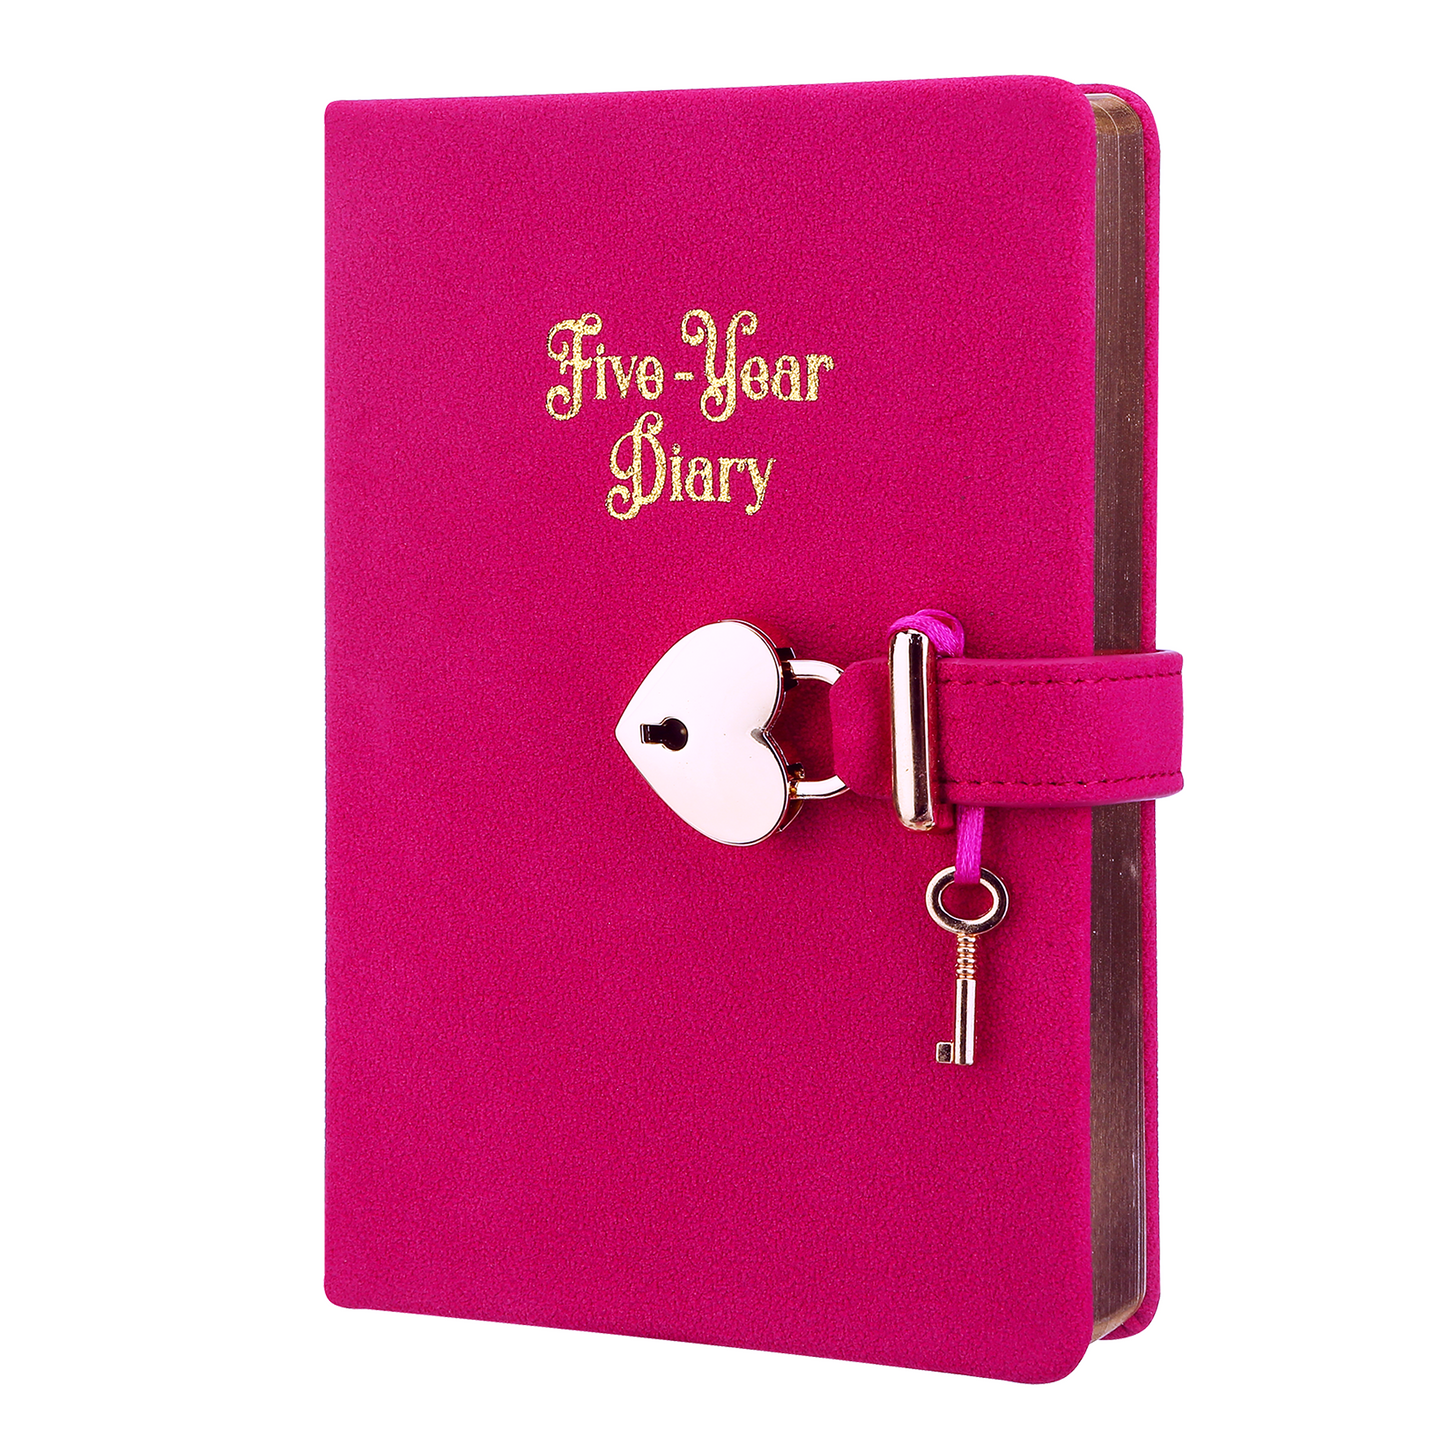 5 Year Diary for Women and Girls: Five-Year Happiness, Memory and Daily Journal with Heart Lock - 4.7x6.5", 394pages (Fuchsia)